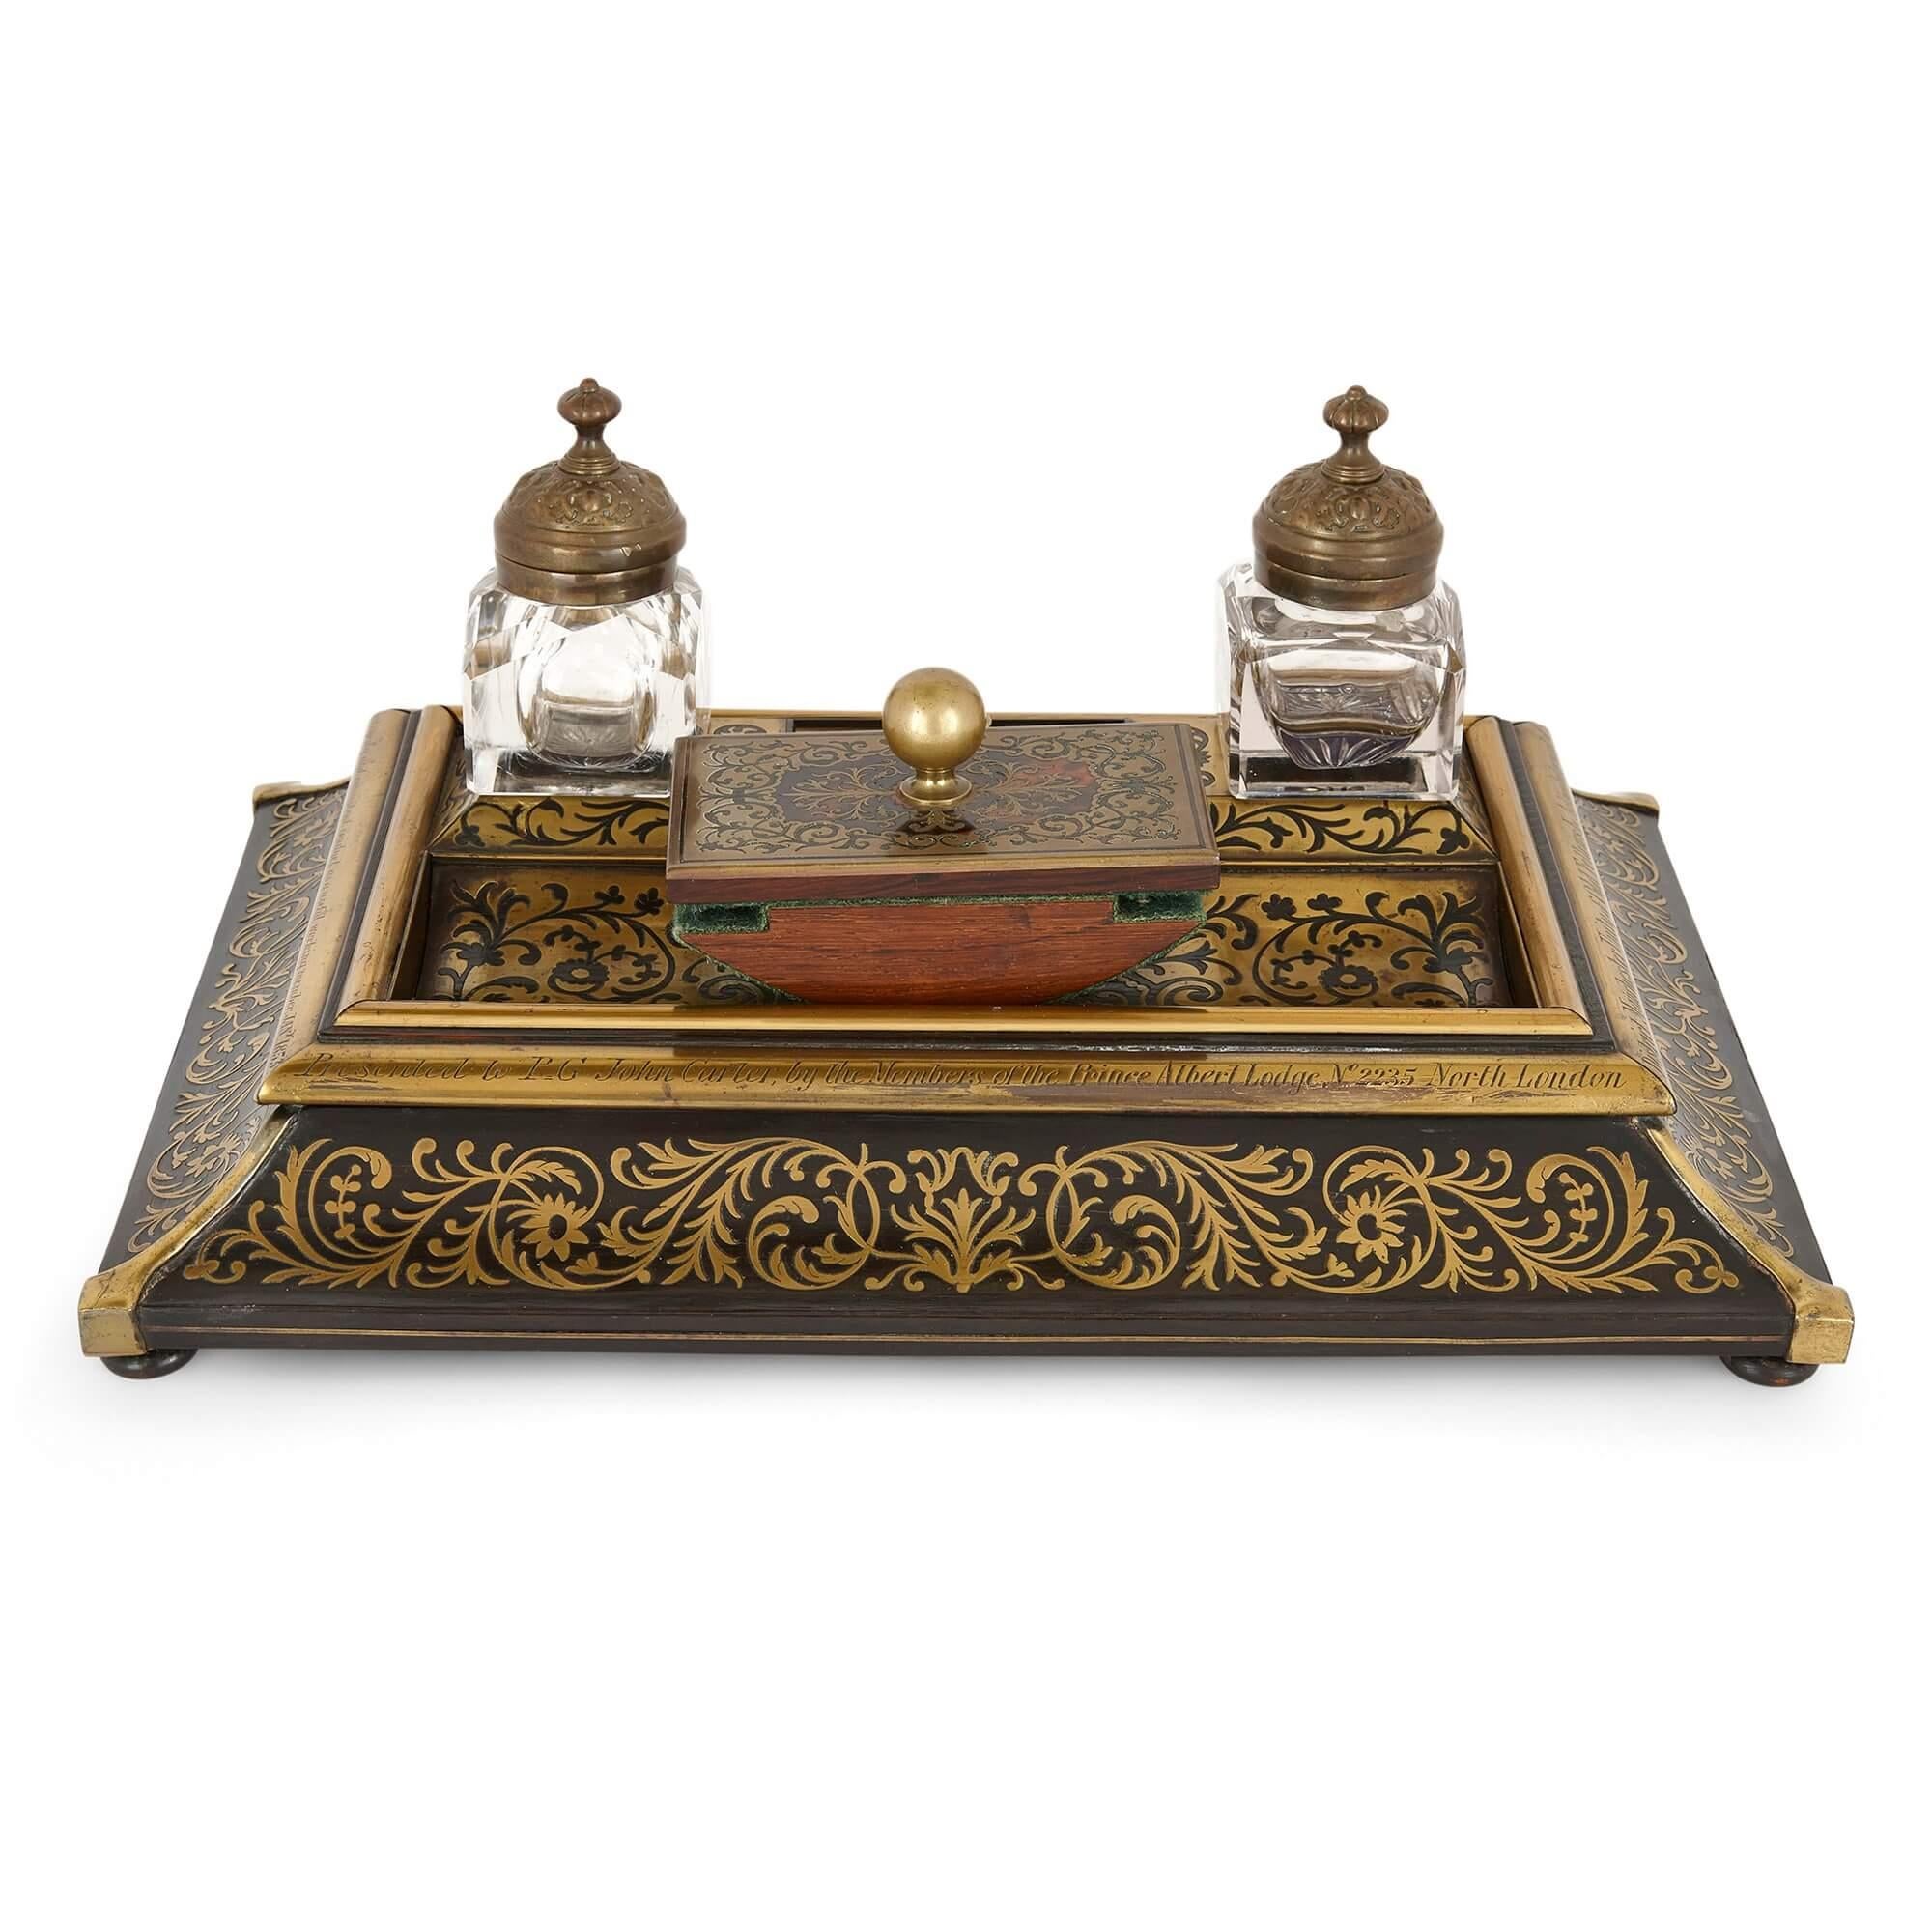 Victorian era inkstand with Boulle marquetry in ebonised wood and brass
English, dated 1853
Measures: Height 17cm, width 38.5cm, depth 27.5cm

This 19th Century English inkstand directly references the Golden Age of French design, incorporating